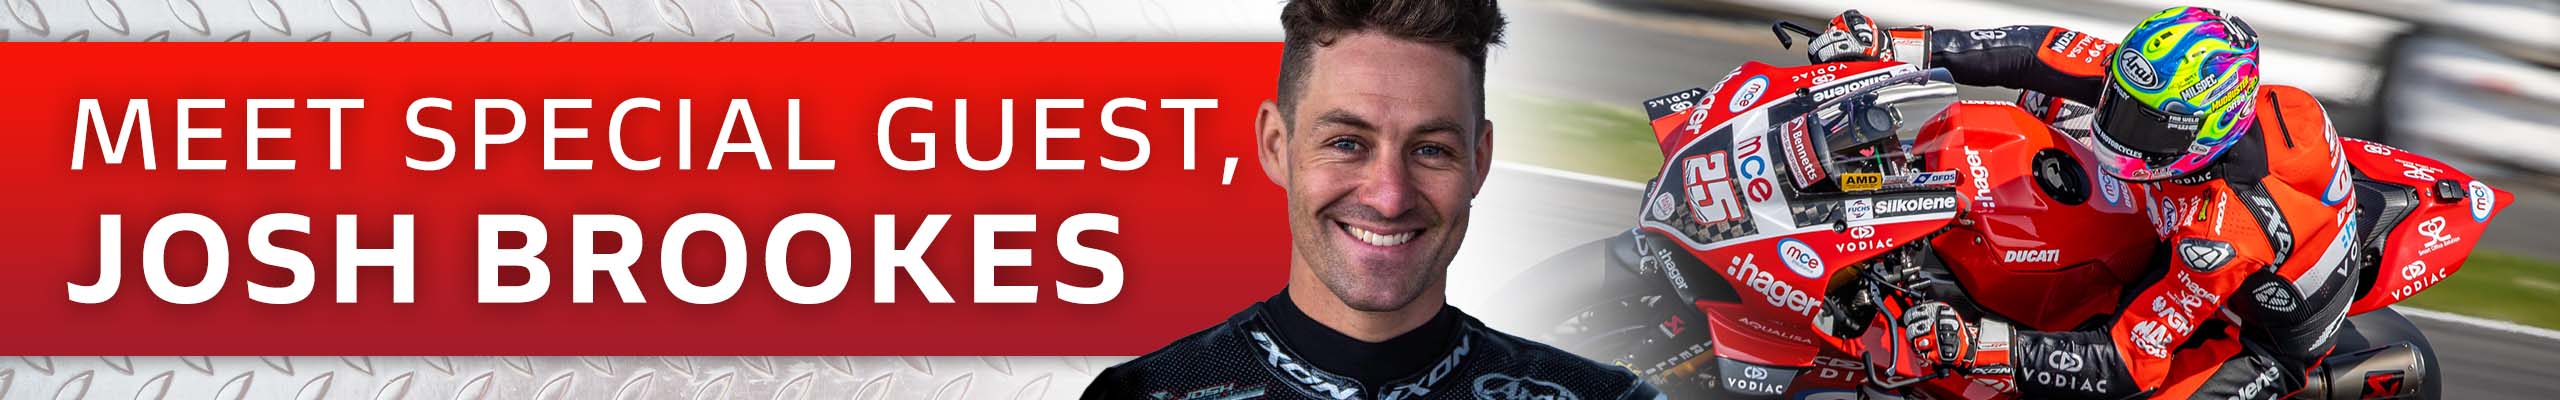 Join us at our Laguna Ducati Summer Celebration Event on Saturday 30th July and meet extra special guest, Josh Brookes!